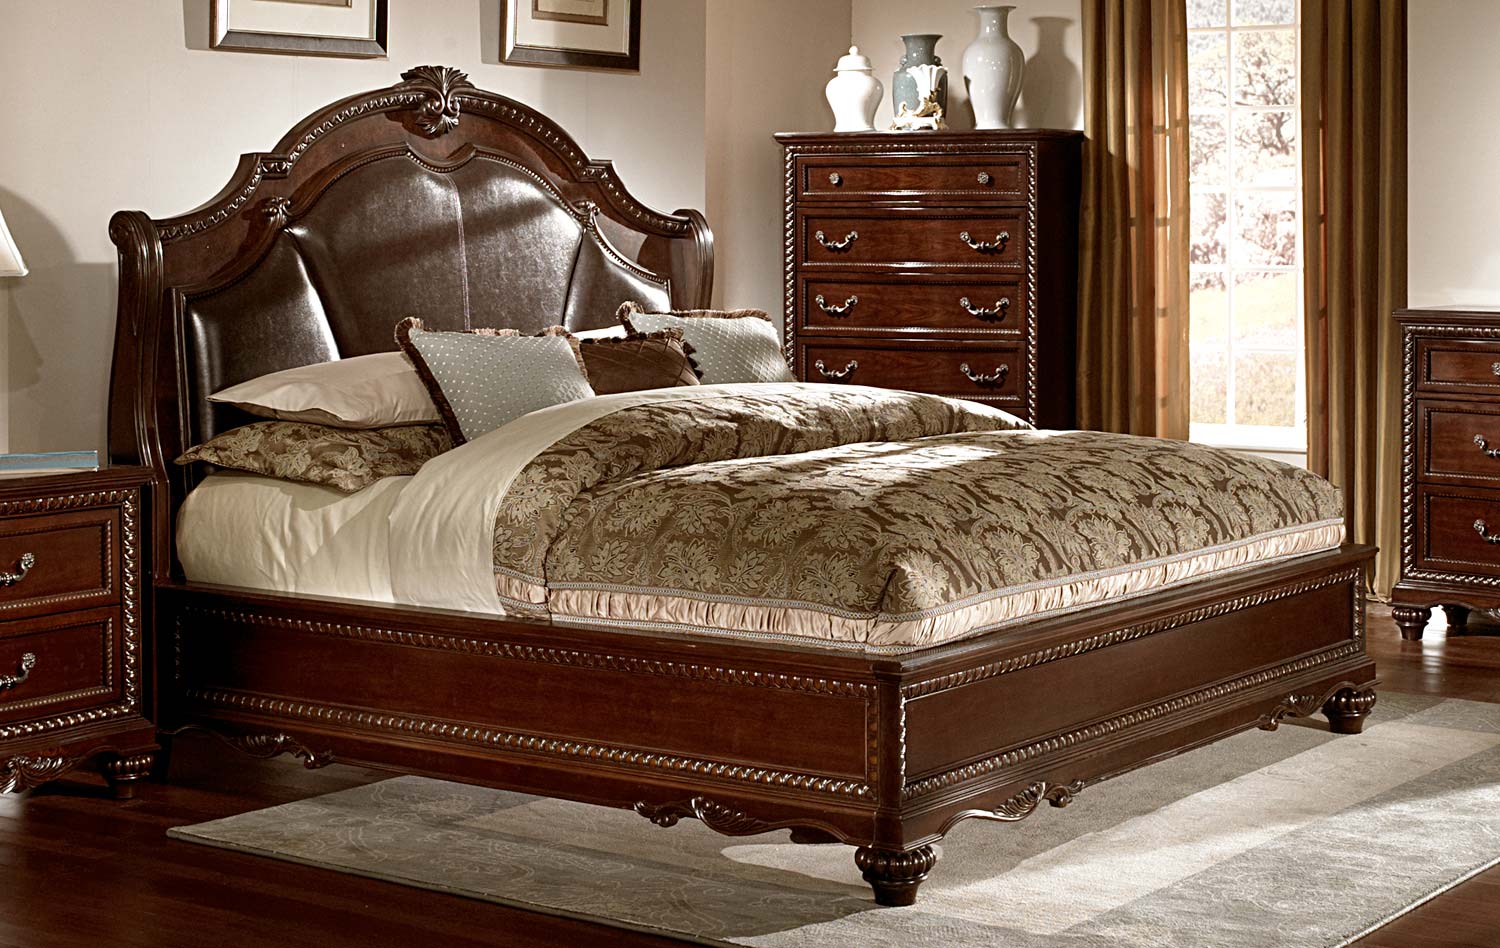 Homelegance Hampstead Court Bed Cherry